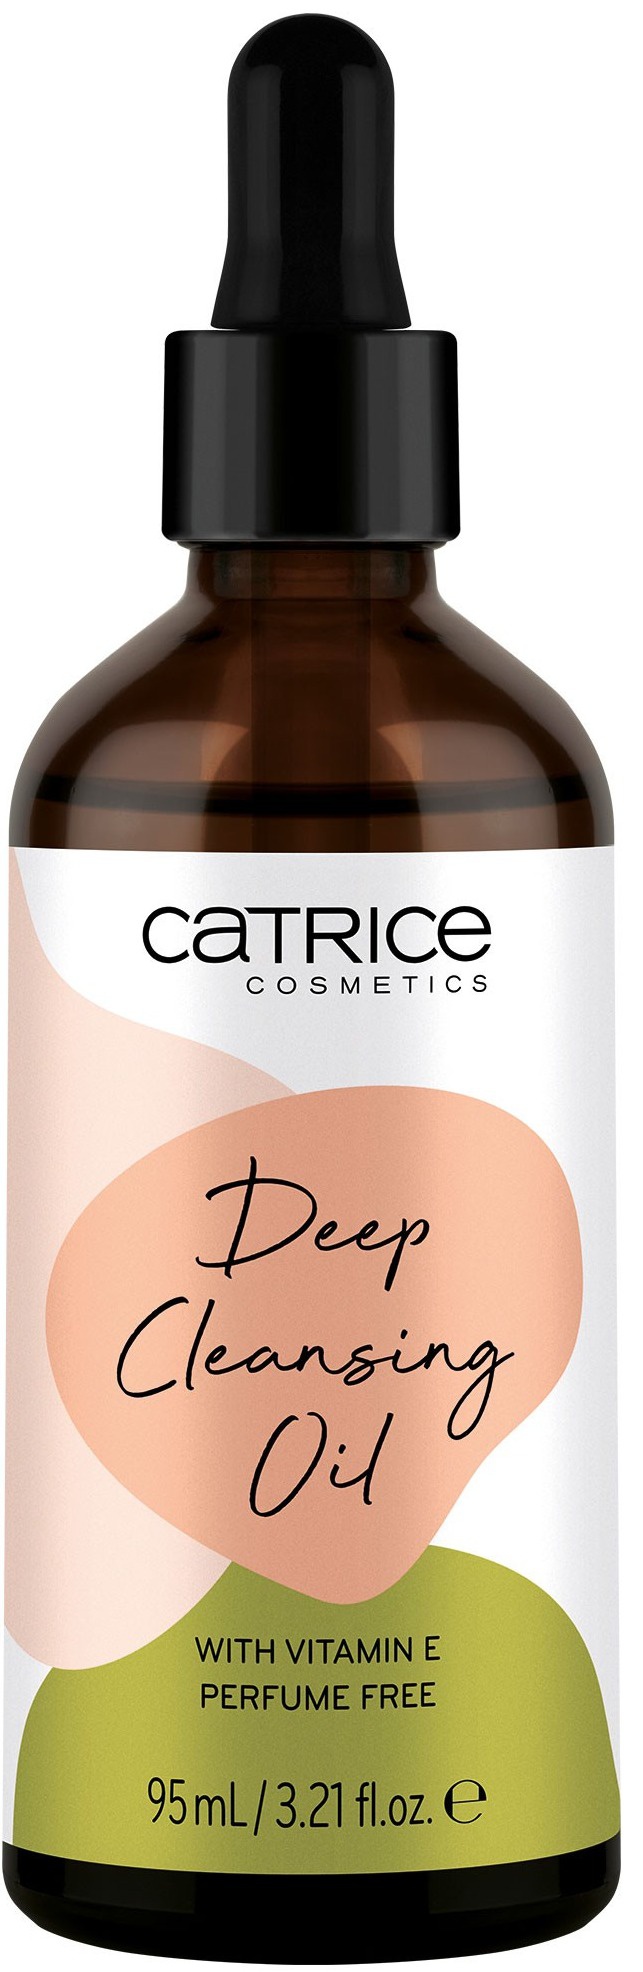 Catrice Deep Cleansing Oil